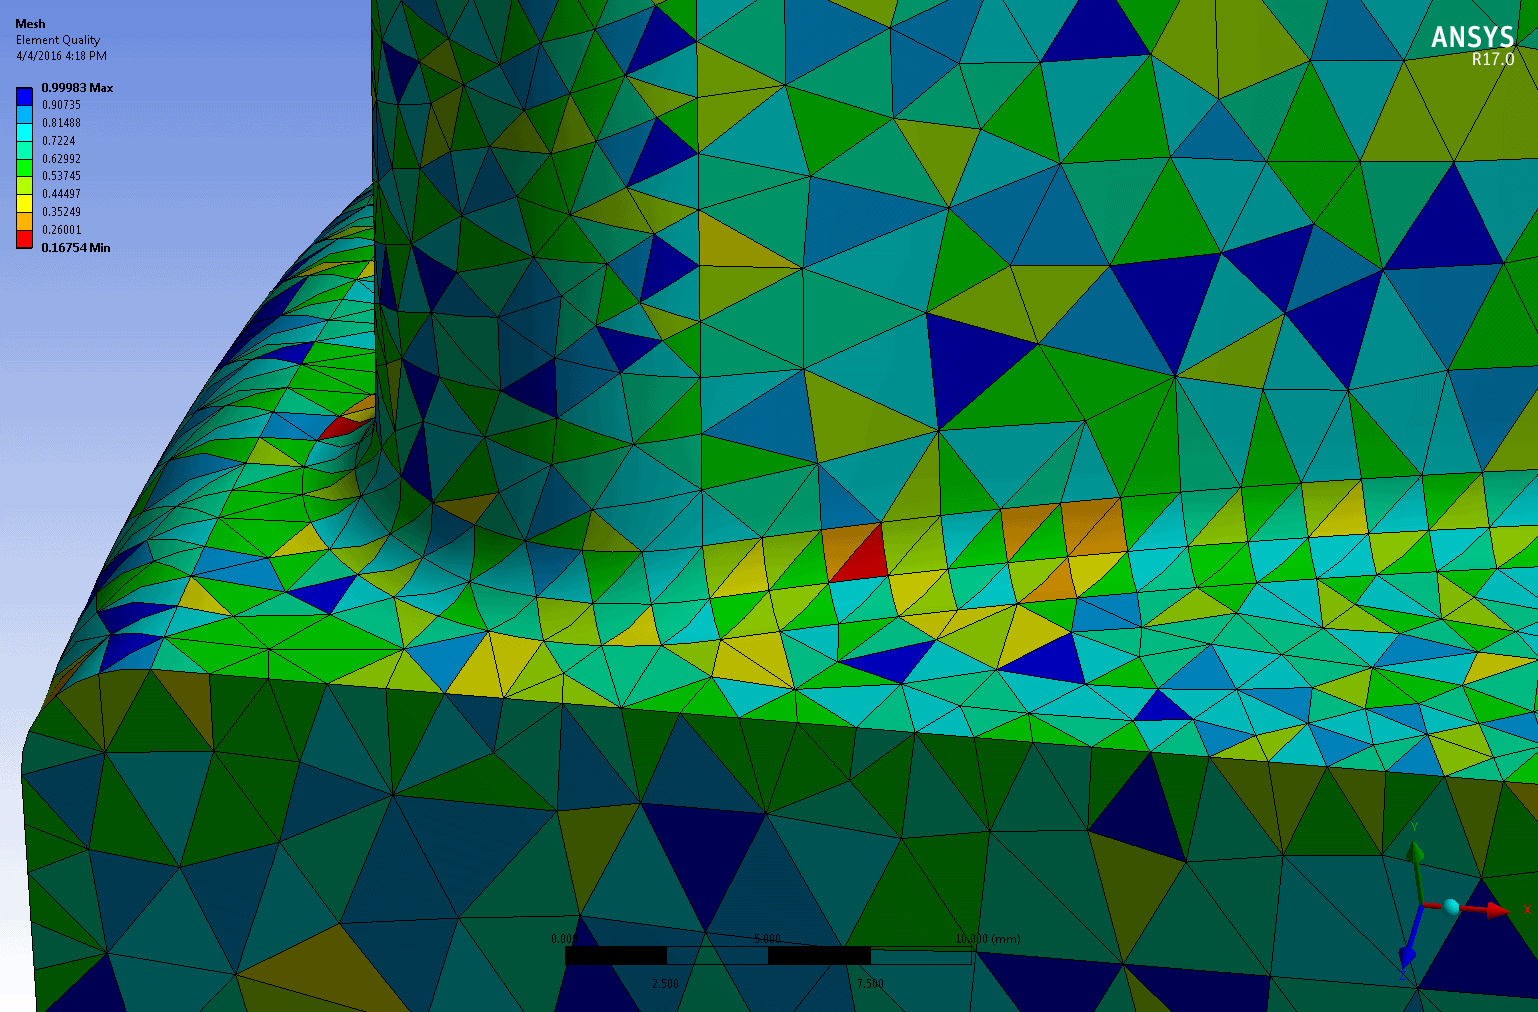 ansys-new-meshing-17-01